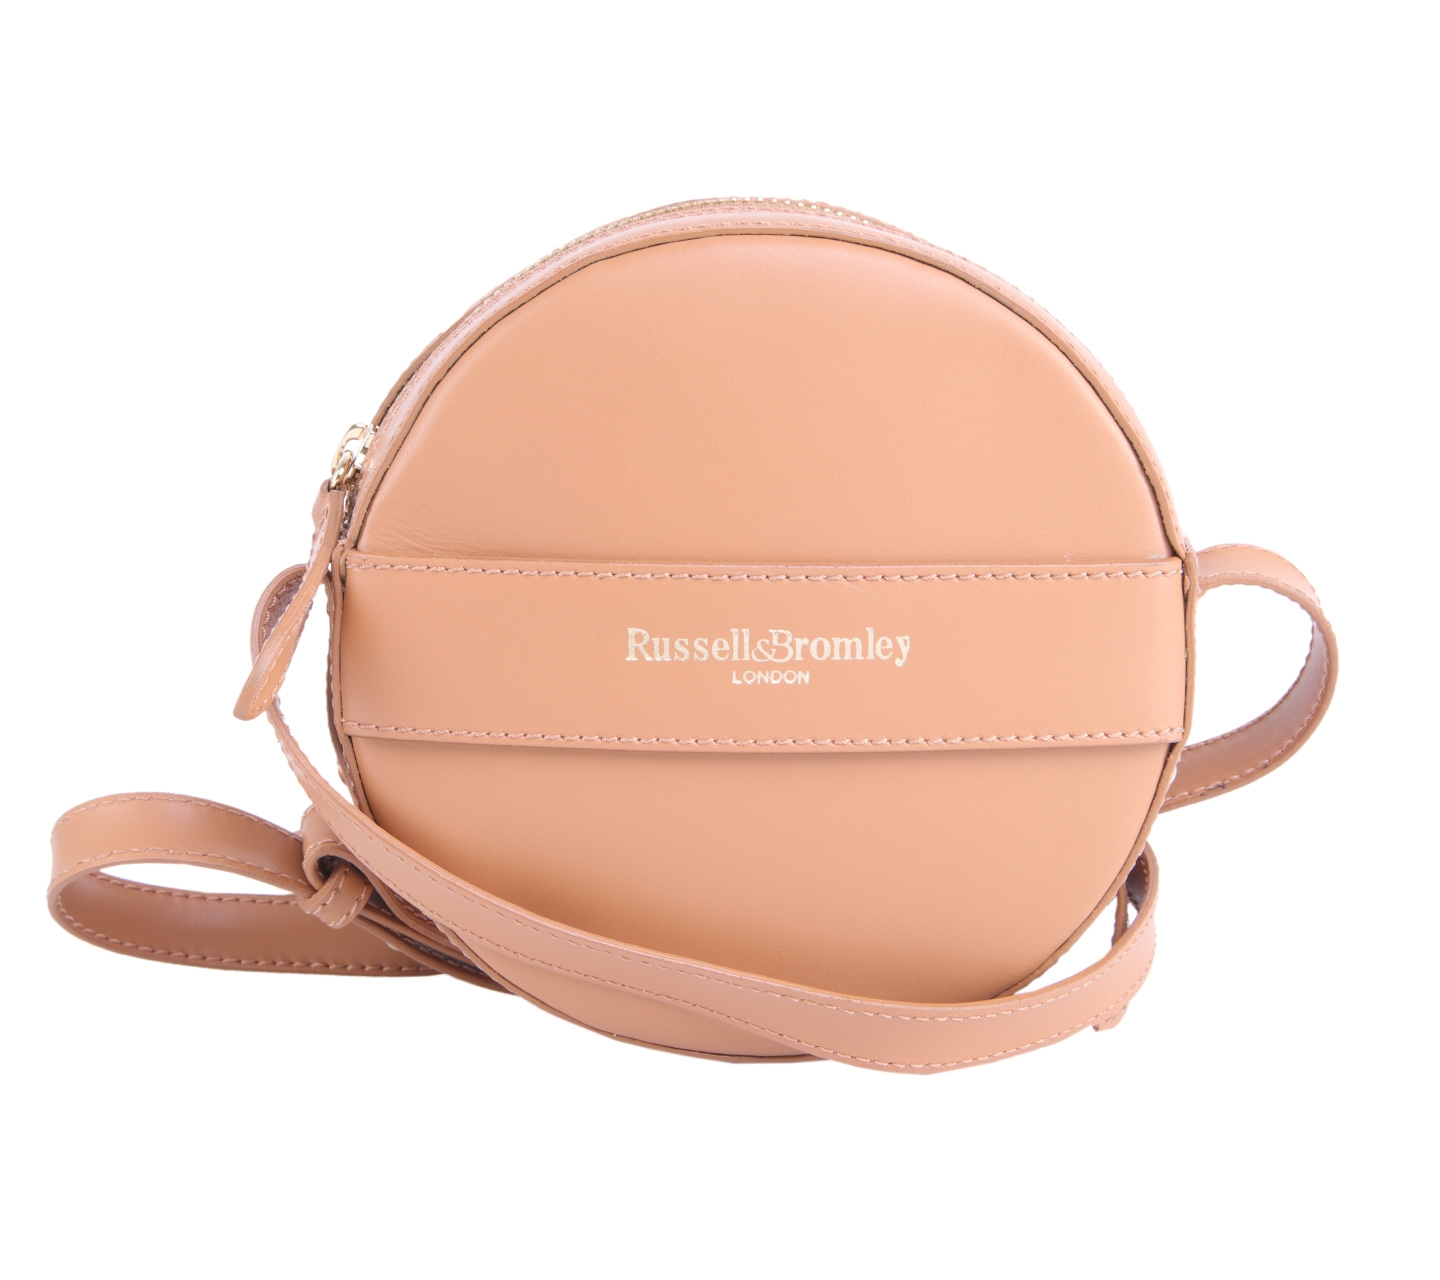 Russell&Bromley Brown Sling Bag